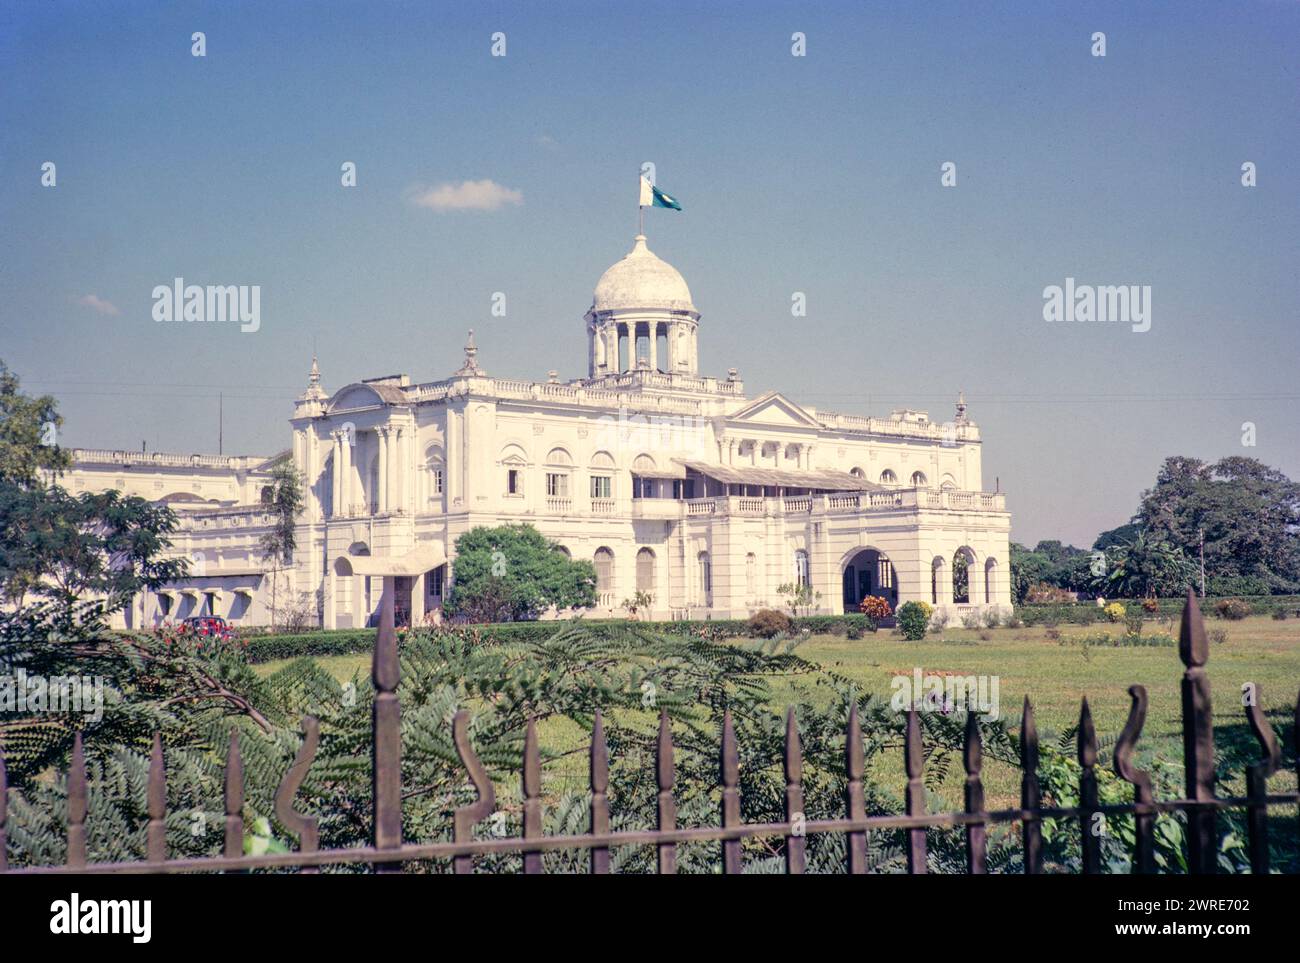 Old High Court Law Courts building, Dhaka, Bangladesh, Asia, 1962 colonial Raj architecture built 1904 for the British Governor Stock Photo